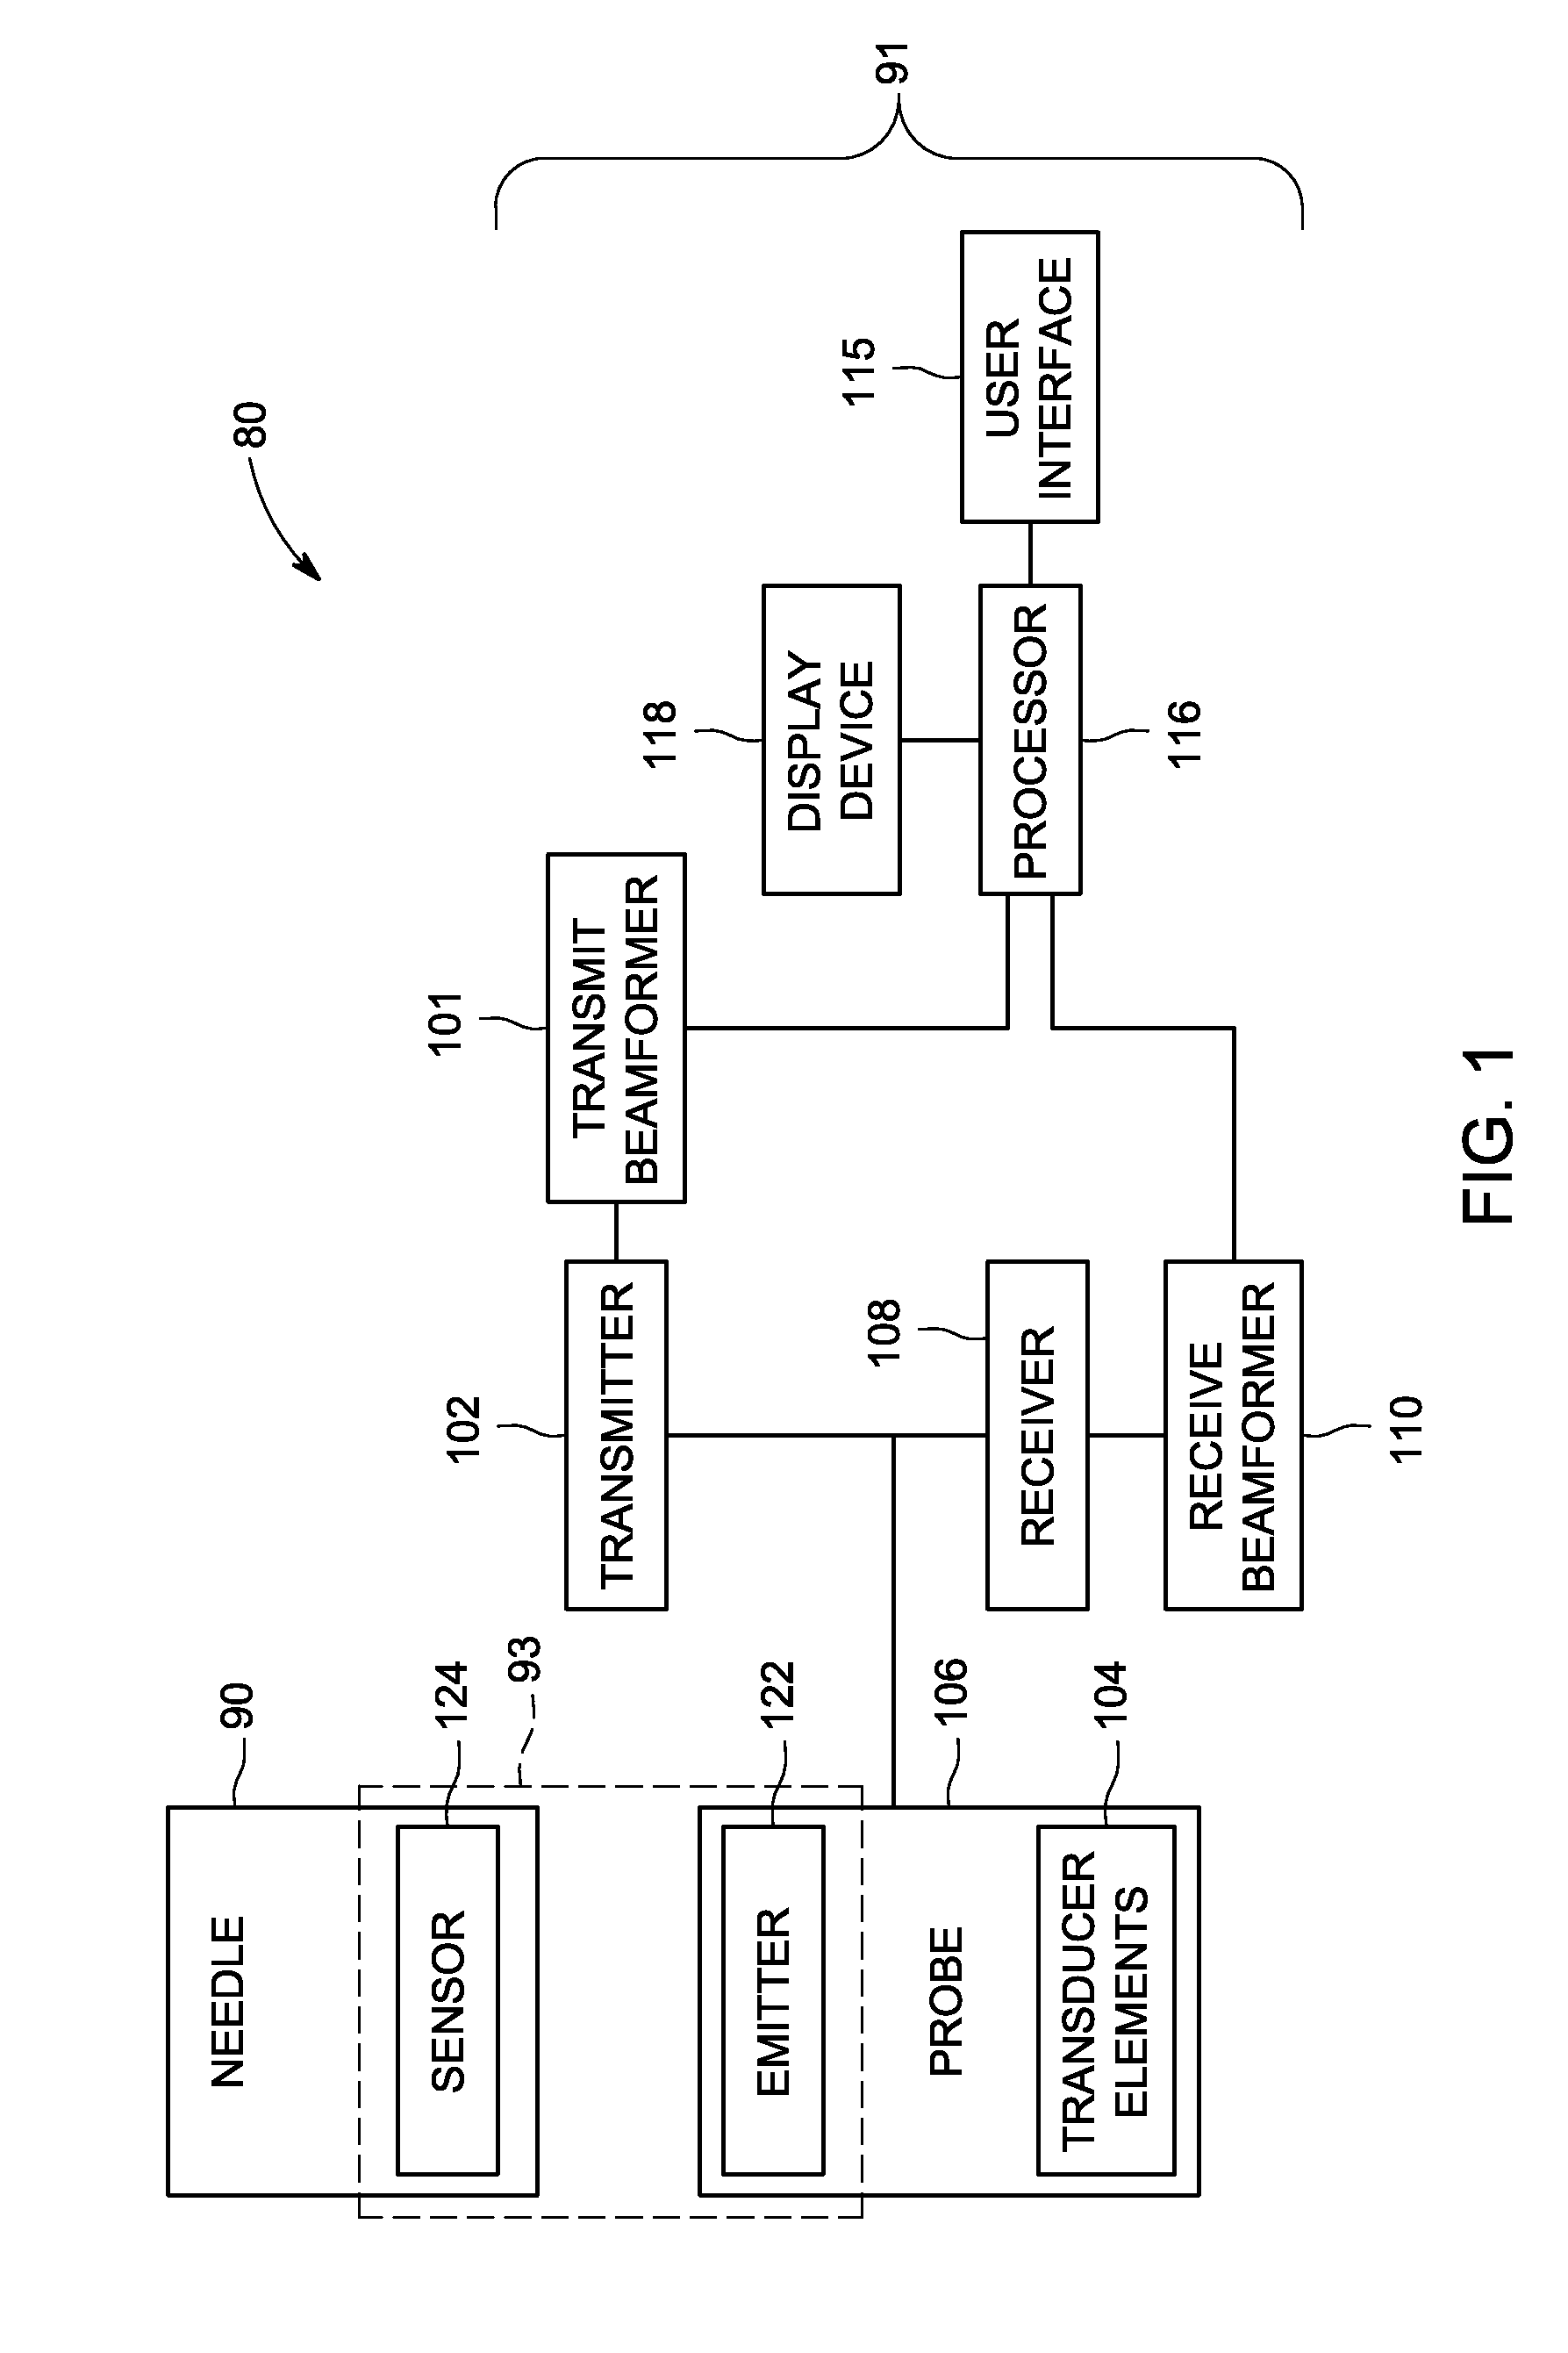 Method and apparatus for ultrasound needle guidance